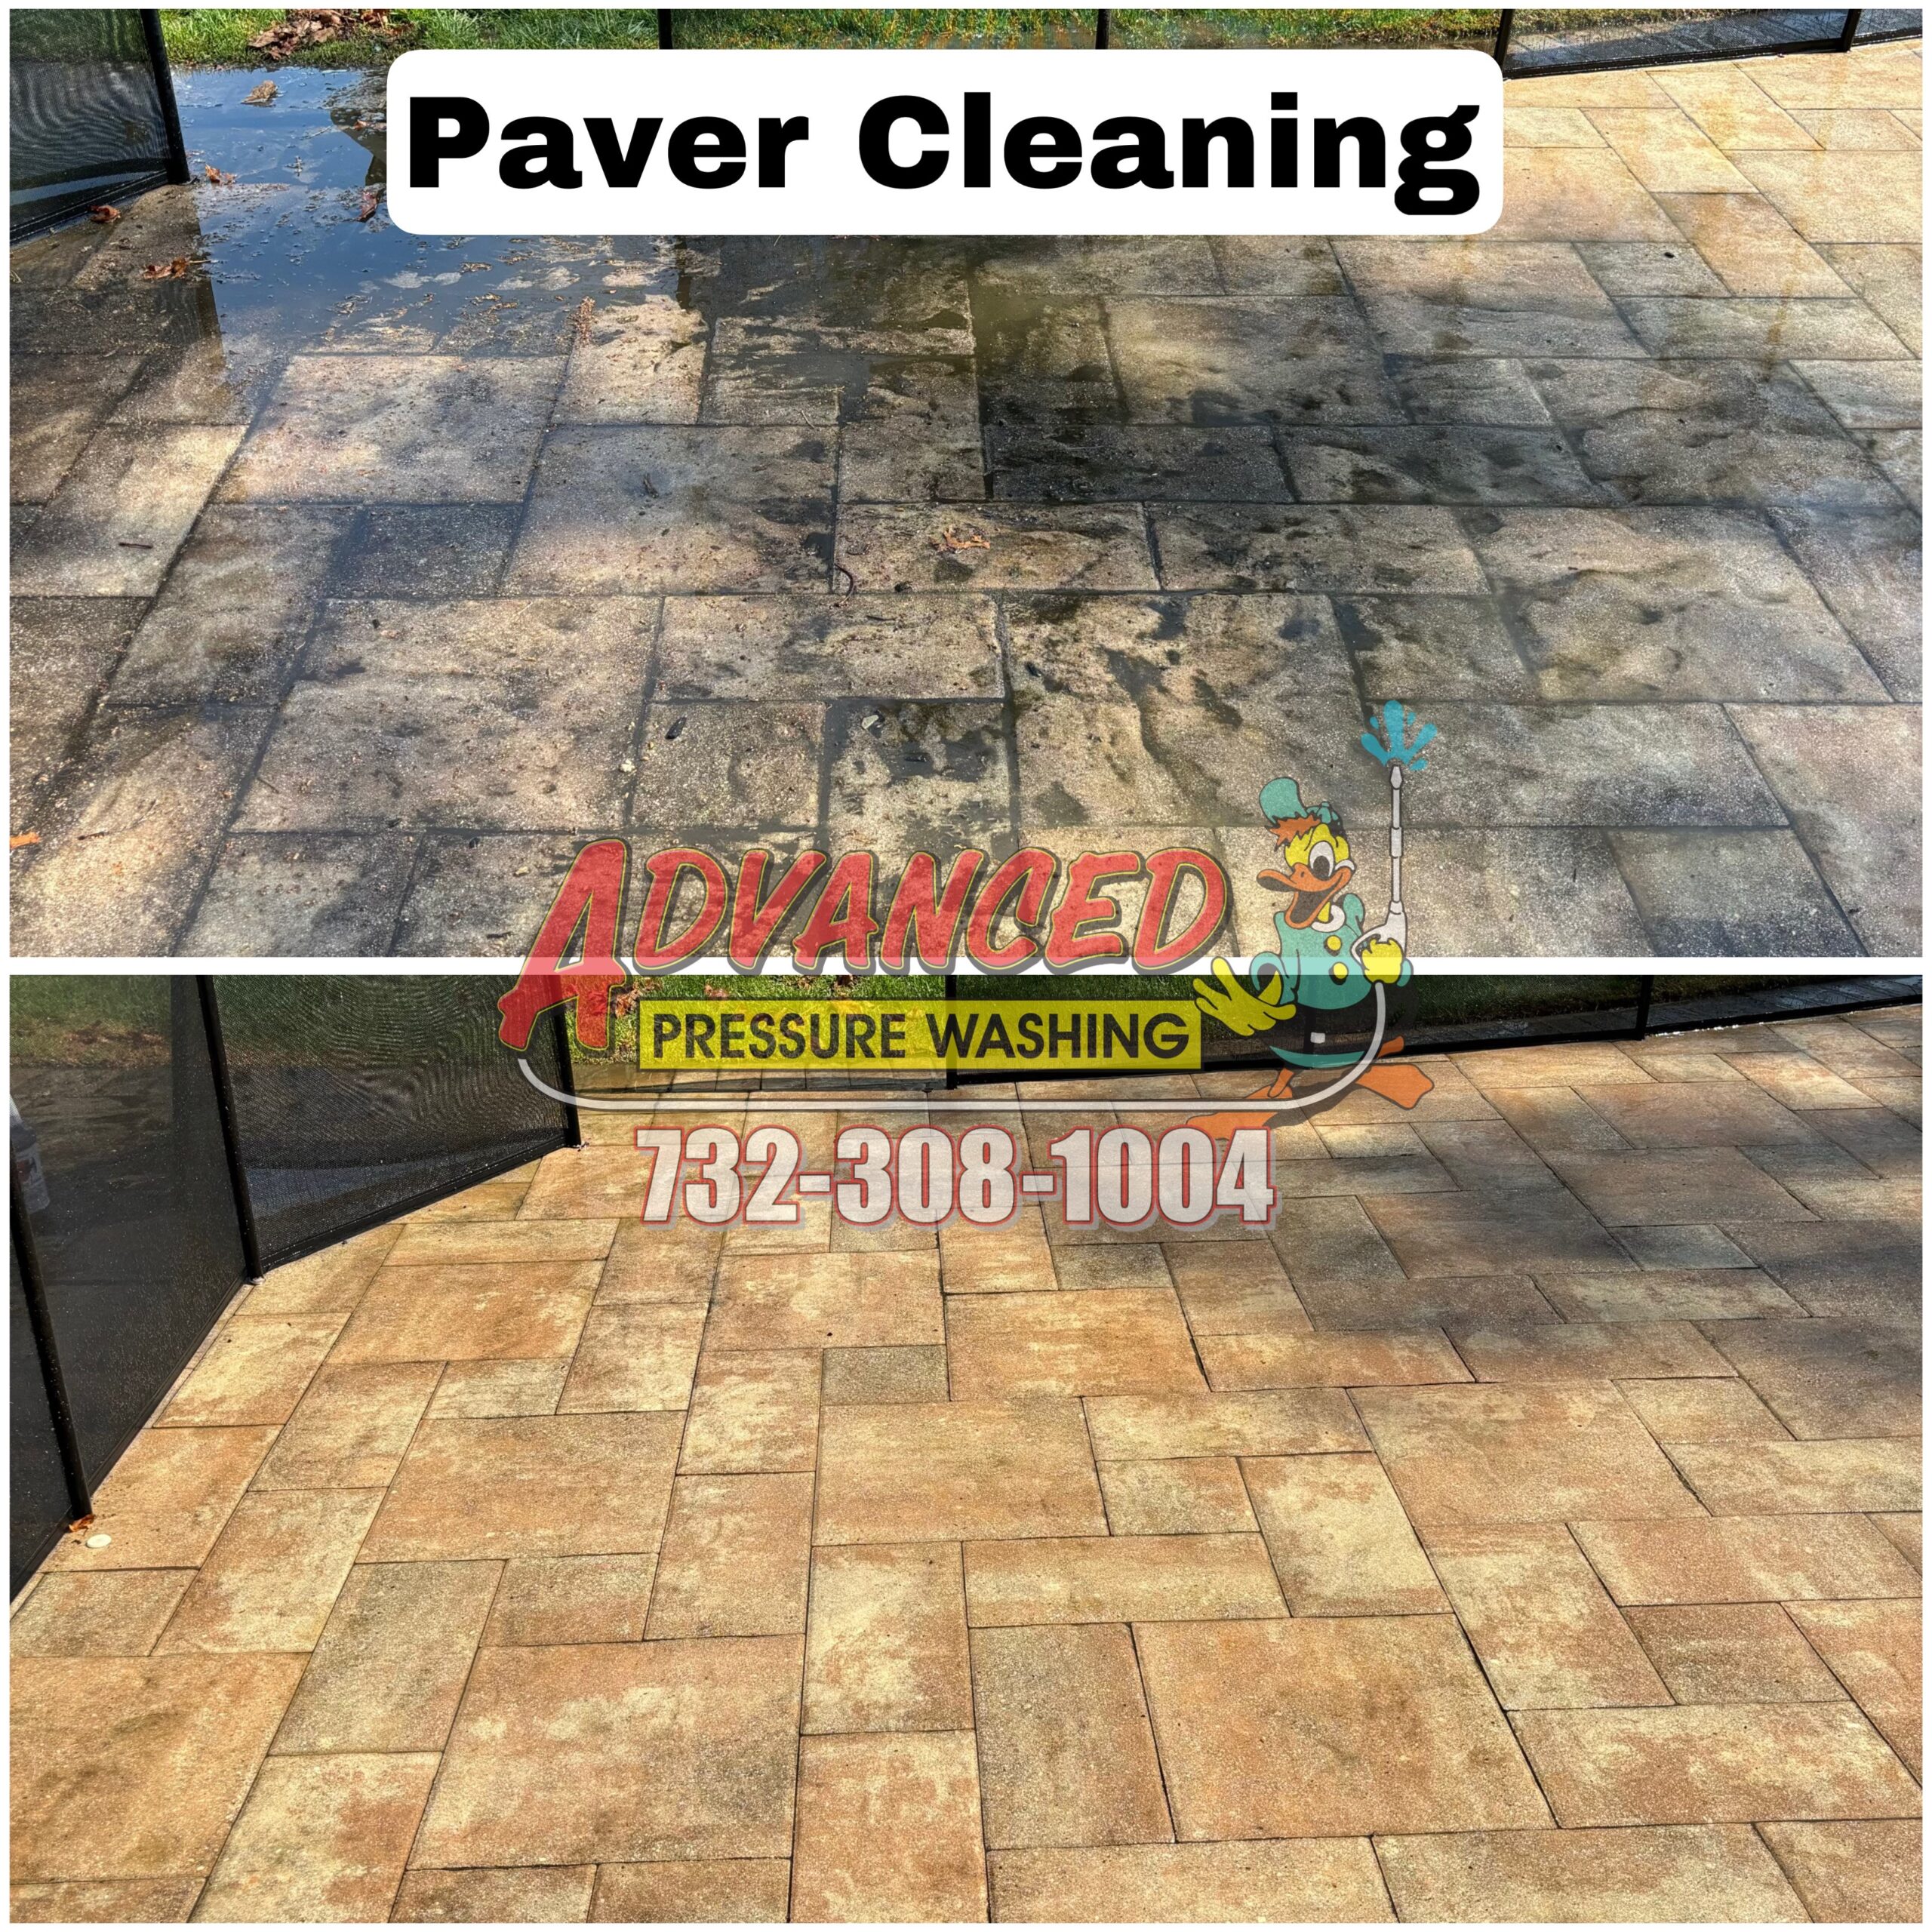 Paver Cleaning (1)